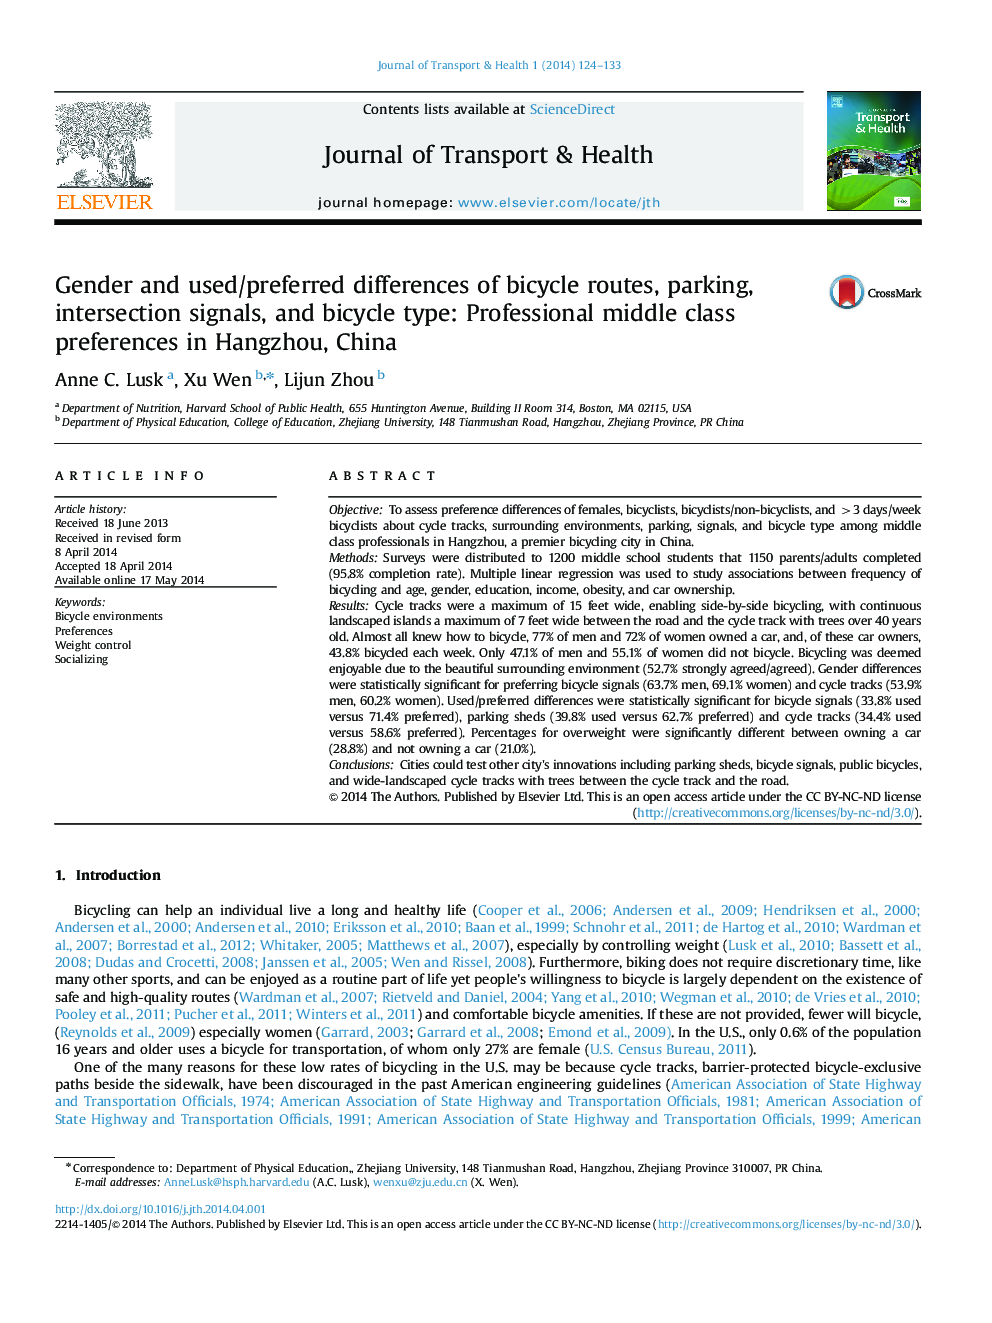 Gender and used/preferred differences of bicycle routes, parking, intersection signals, and bicycle type: Professional middle class preferences in Hangzhou, China